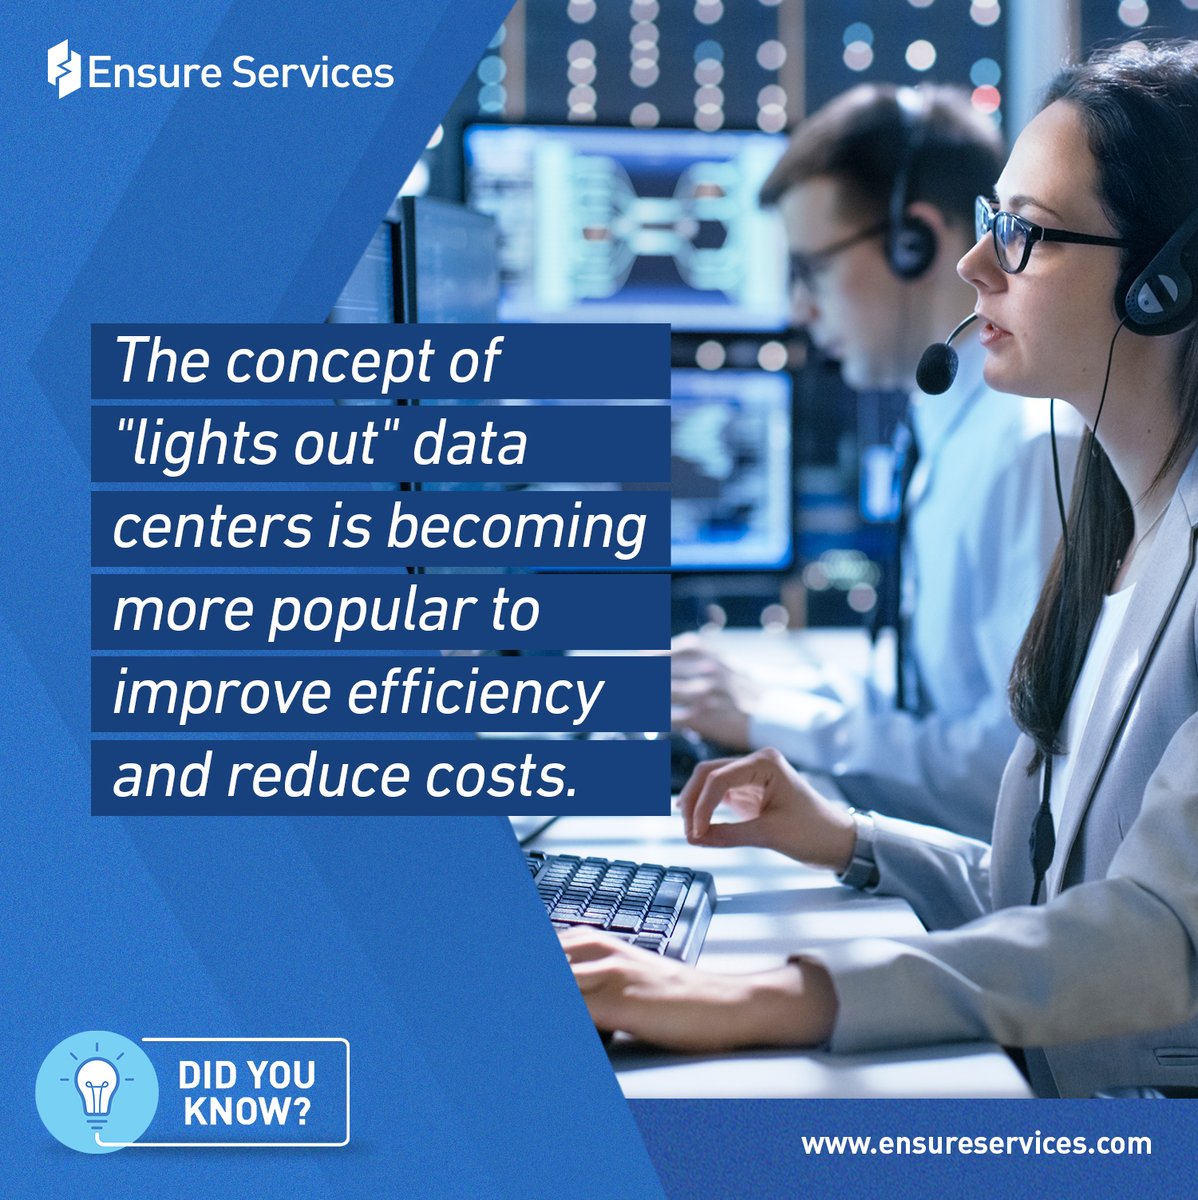 #Didyouknow

With 'Lights Out' data centres, step into the shadows and unlock the true potential of technology.

#EnsureServices #ITSolutionsProvider #AuthorisedServiceProvider #MEA #EnterpriseSolutions #DataCentres #business #datamanagment